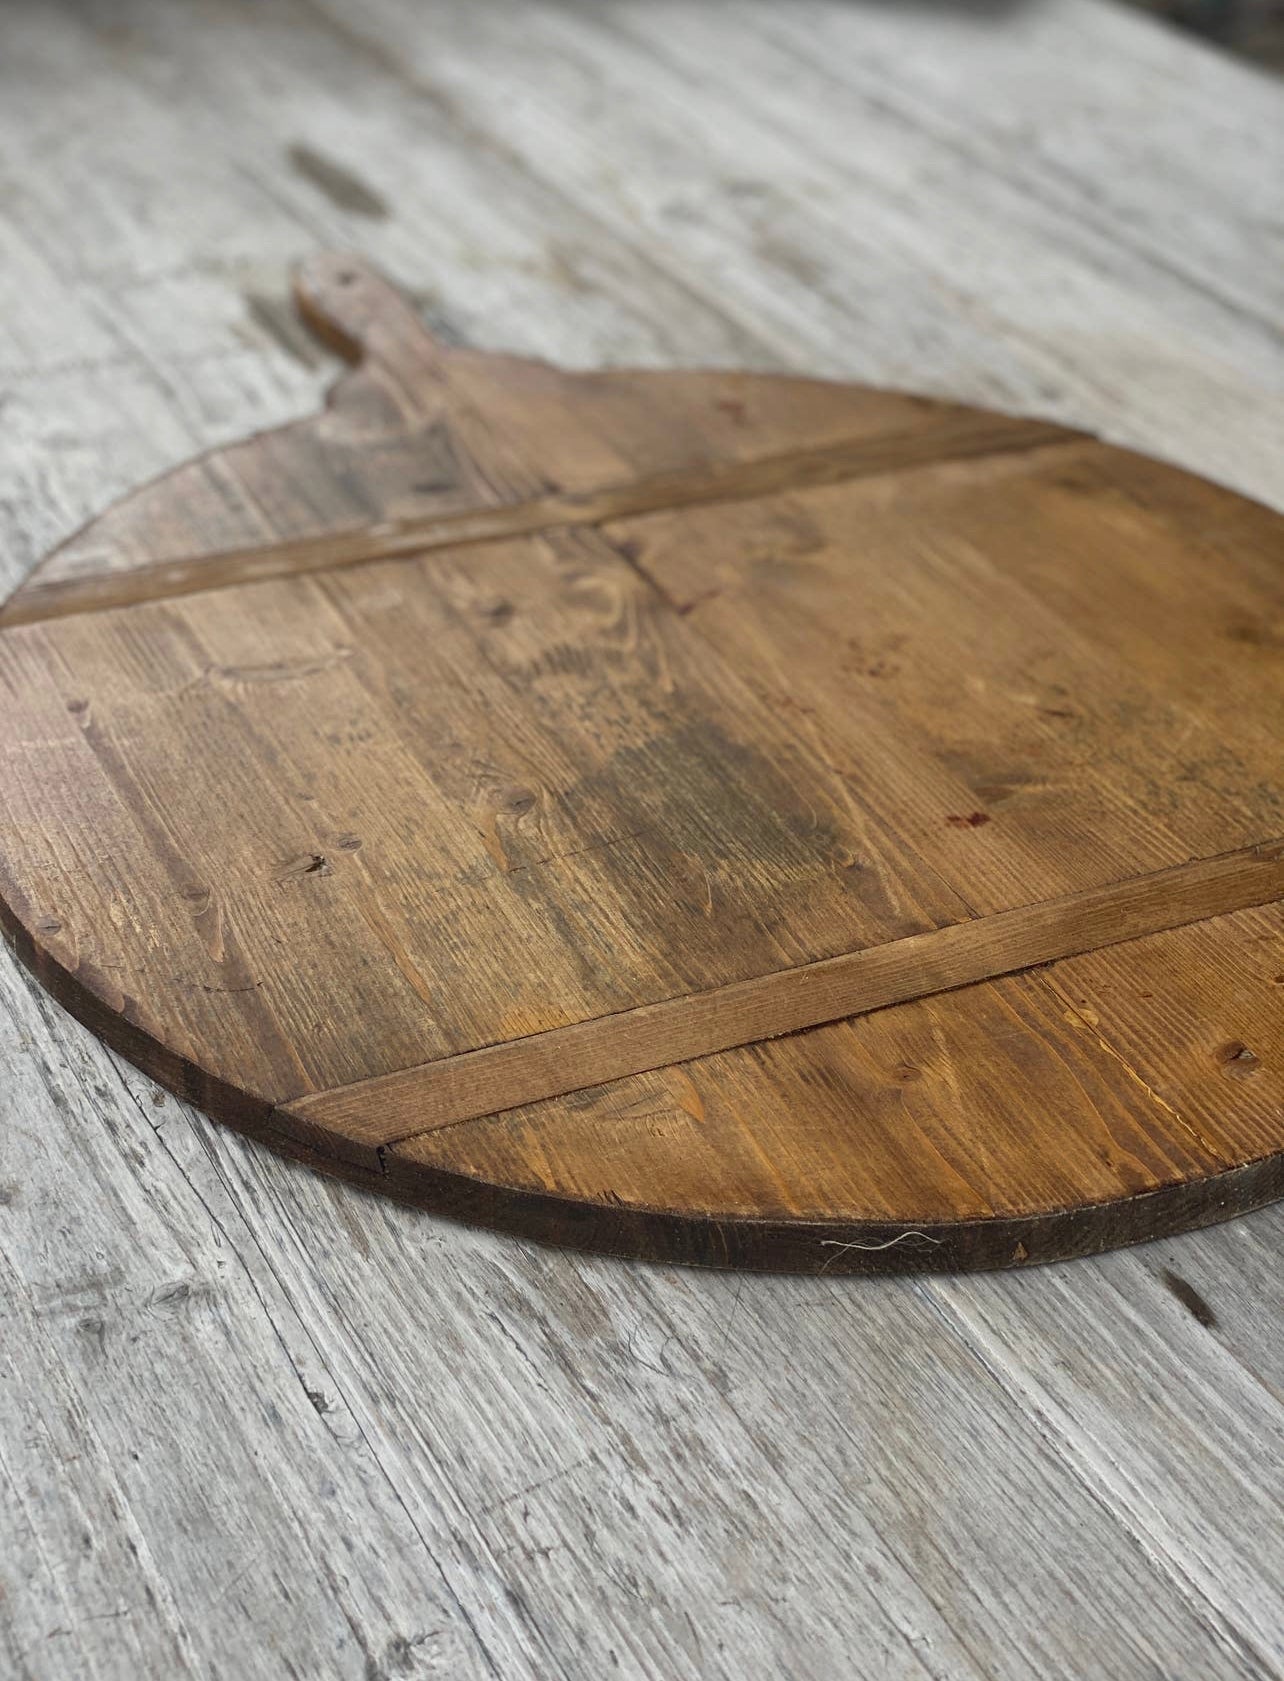 Large European Rectangle Bread Board - CHASING VINTAGE